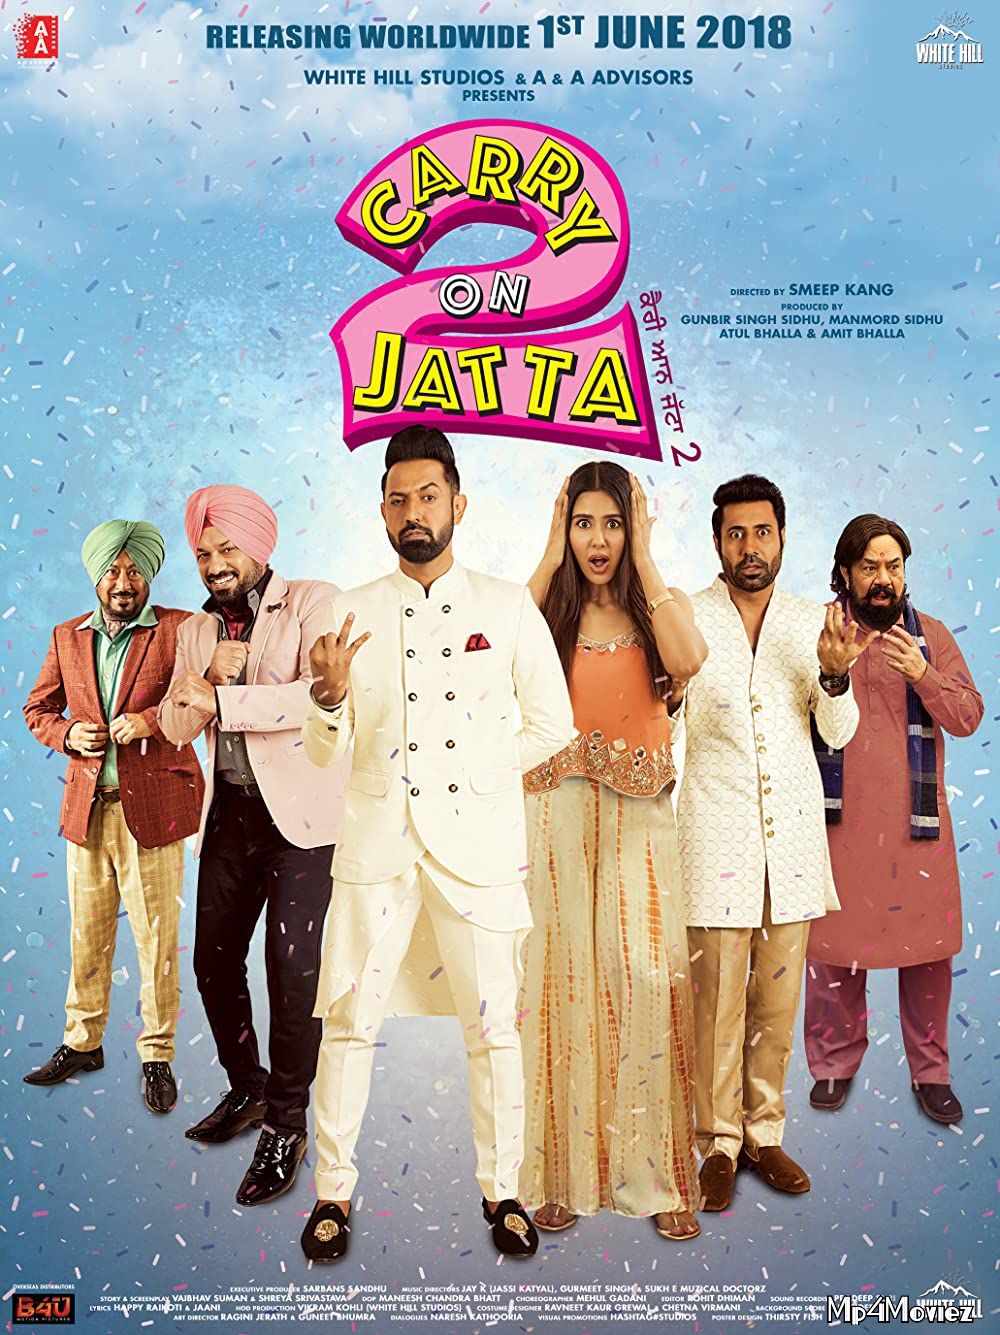 Carry On Balle Balle (Carry On Jatta 2) 2020 Hindi Dubbed Full Movie download full movie